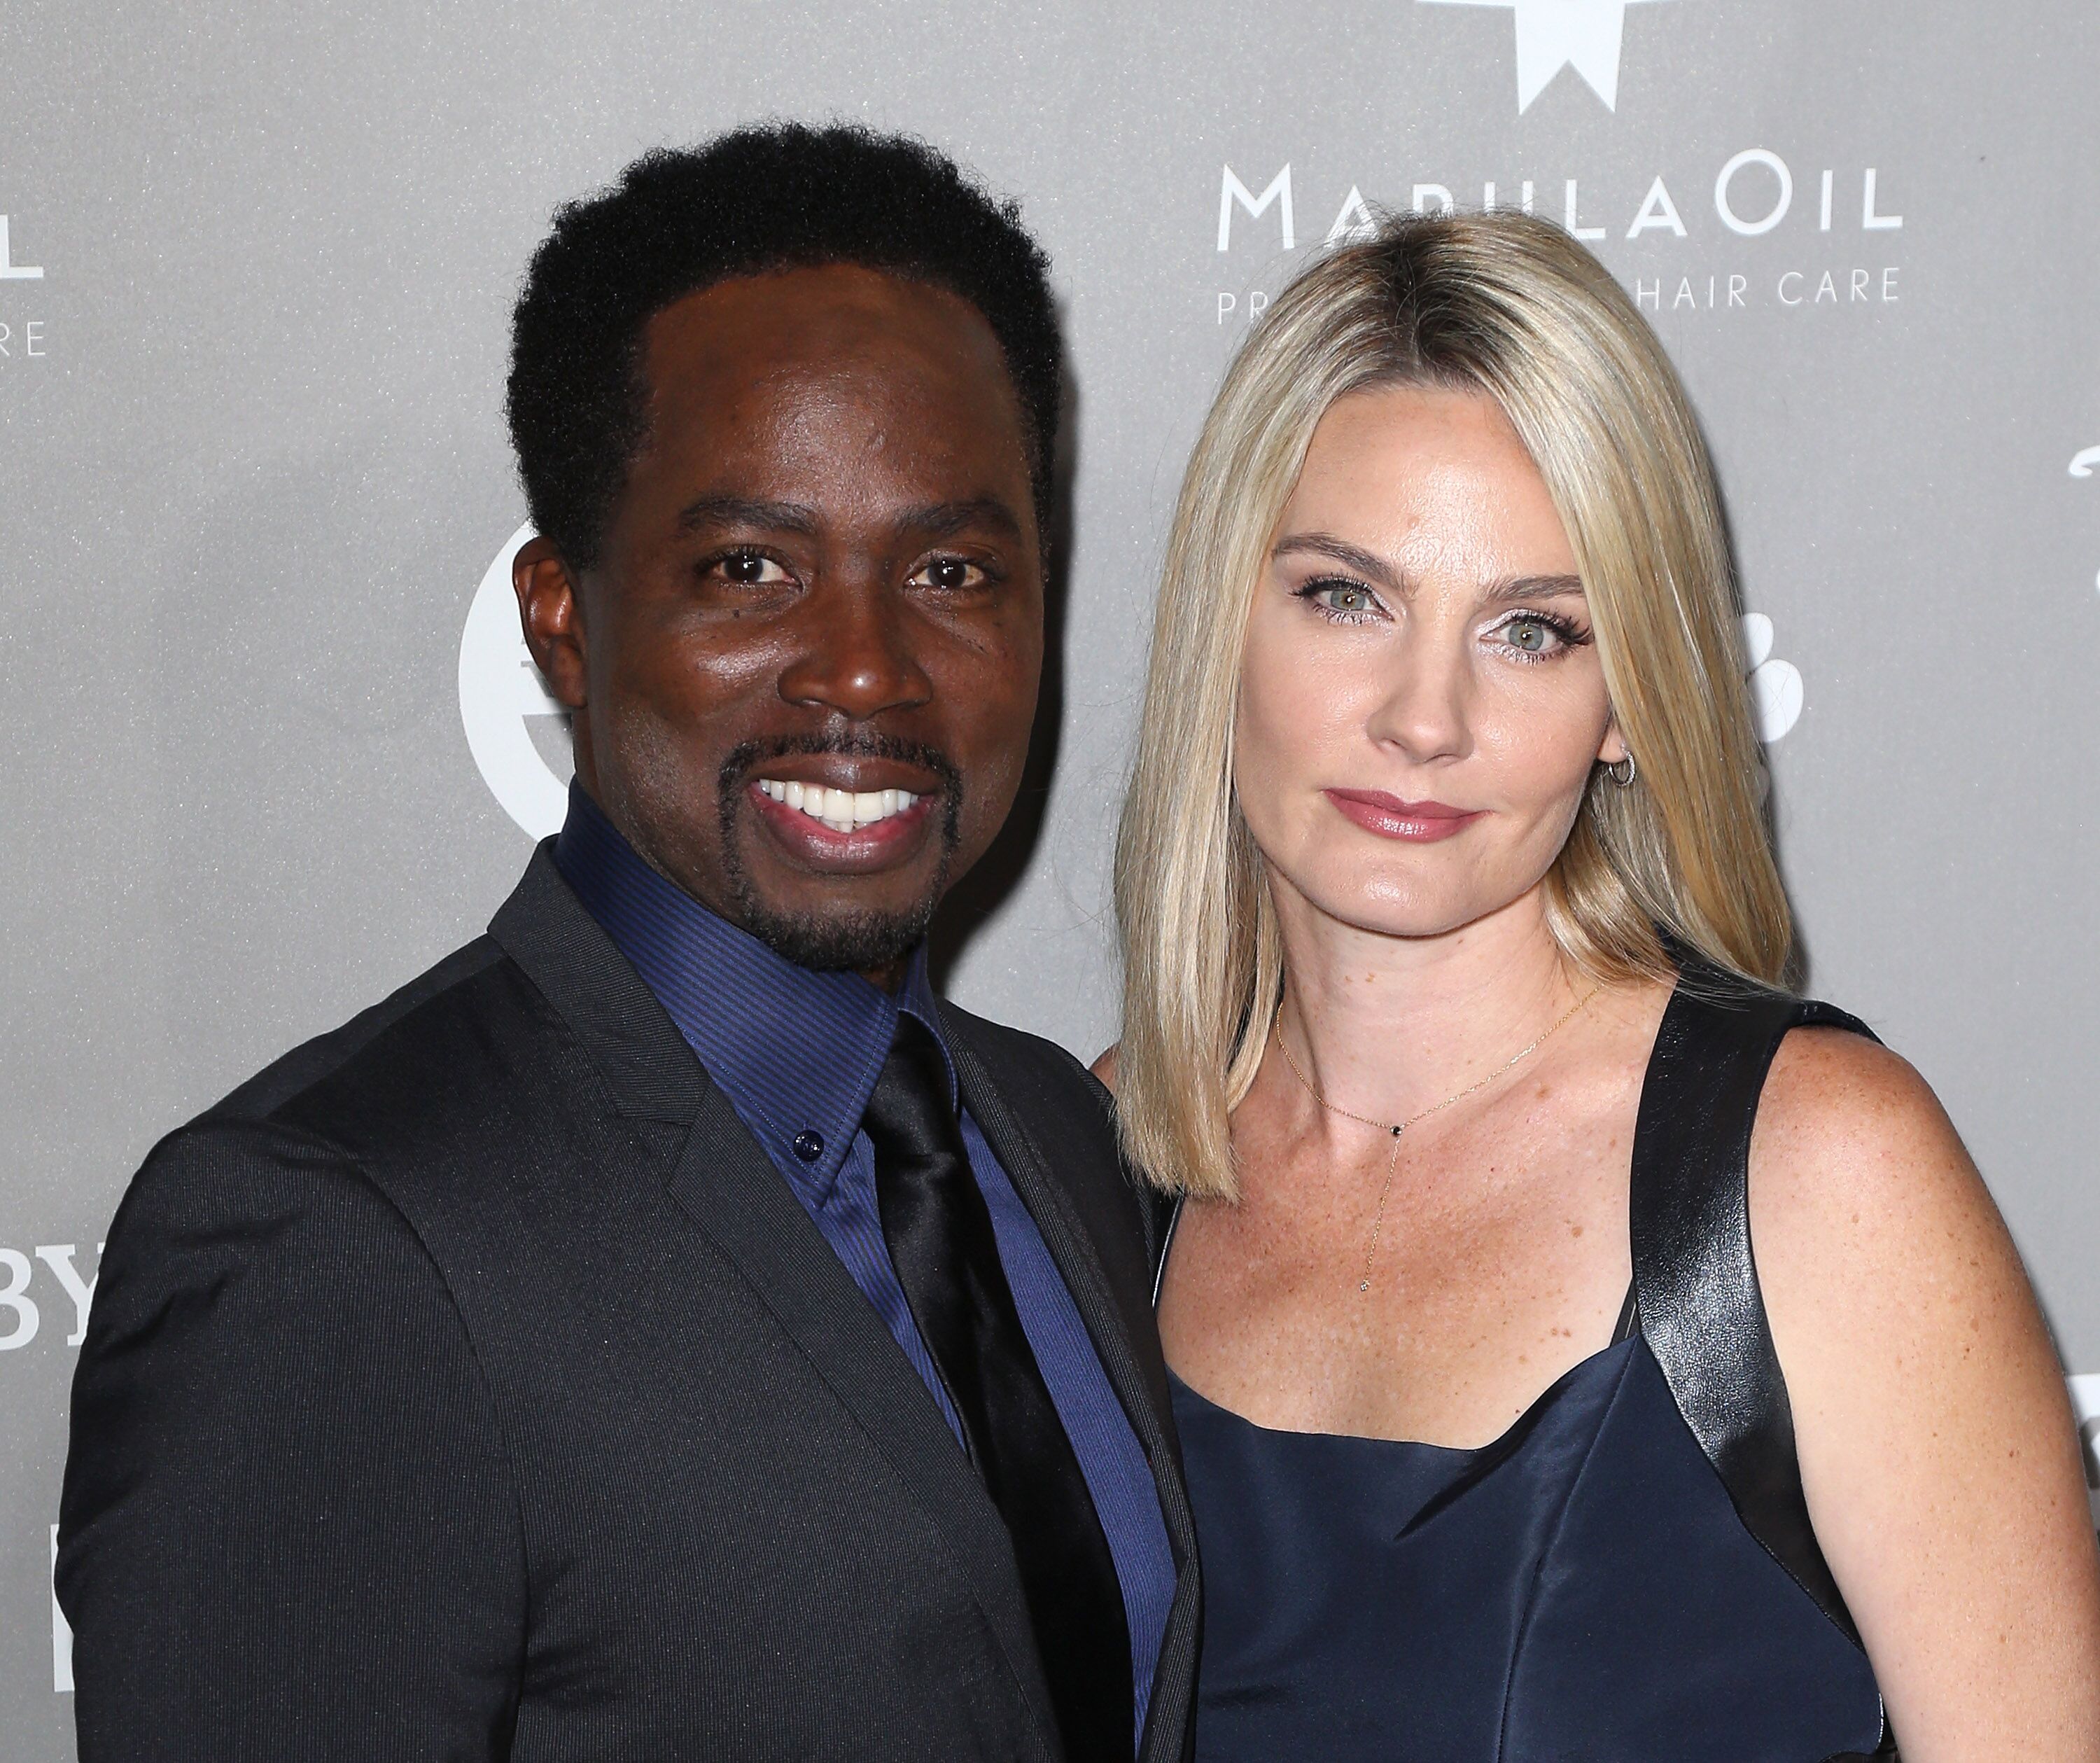 Actor Harold Perrineau (L) and wife Brittany Perrineau attend the 2015 Baby2Baby Gala presented by MarulaOil & Kayne Capital Advisors Foundation at 3LABS on November 14, 2015 in Culver City, California. | Photo: Getty Images.